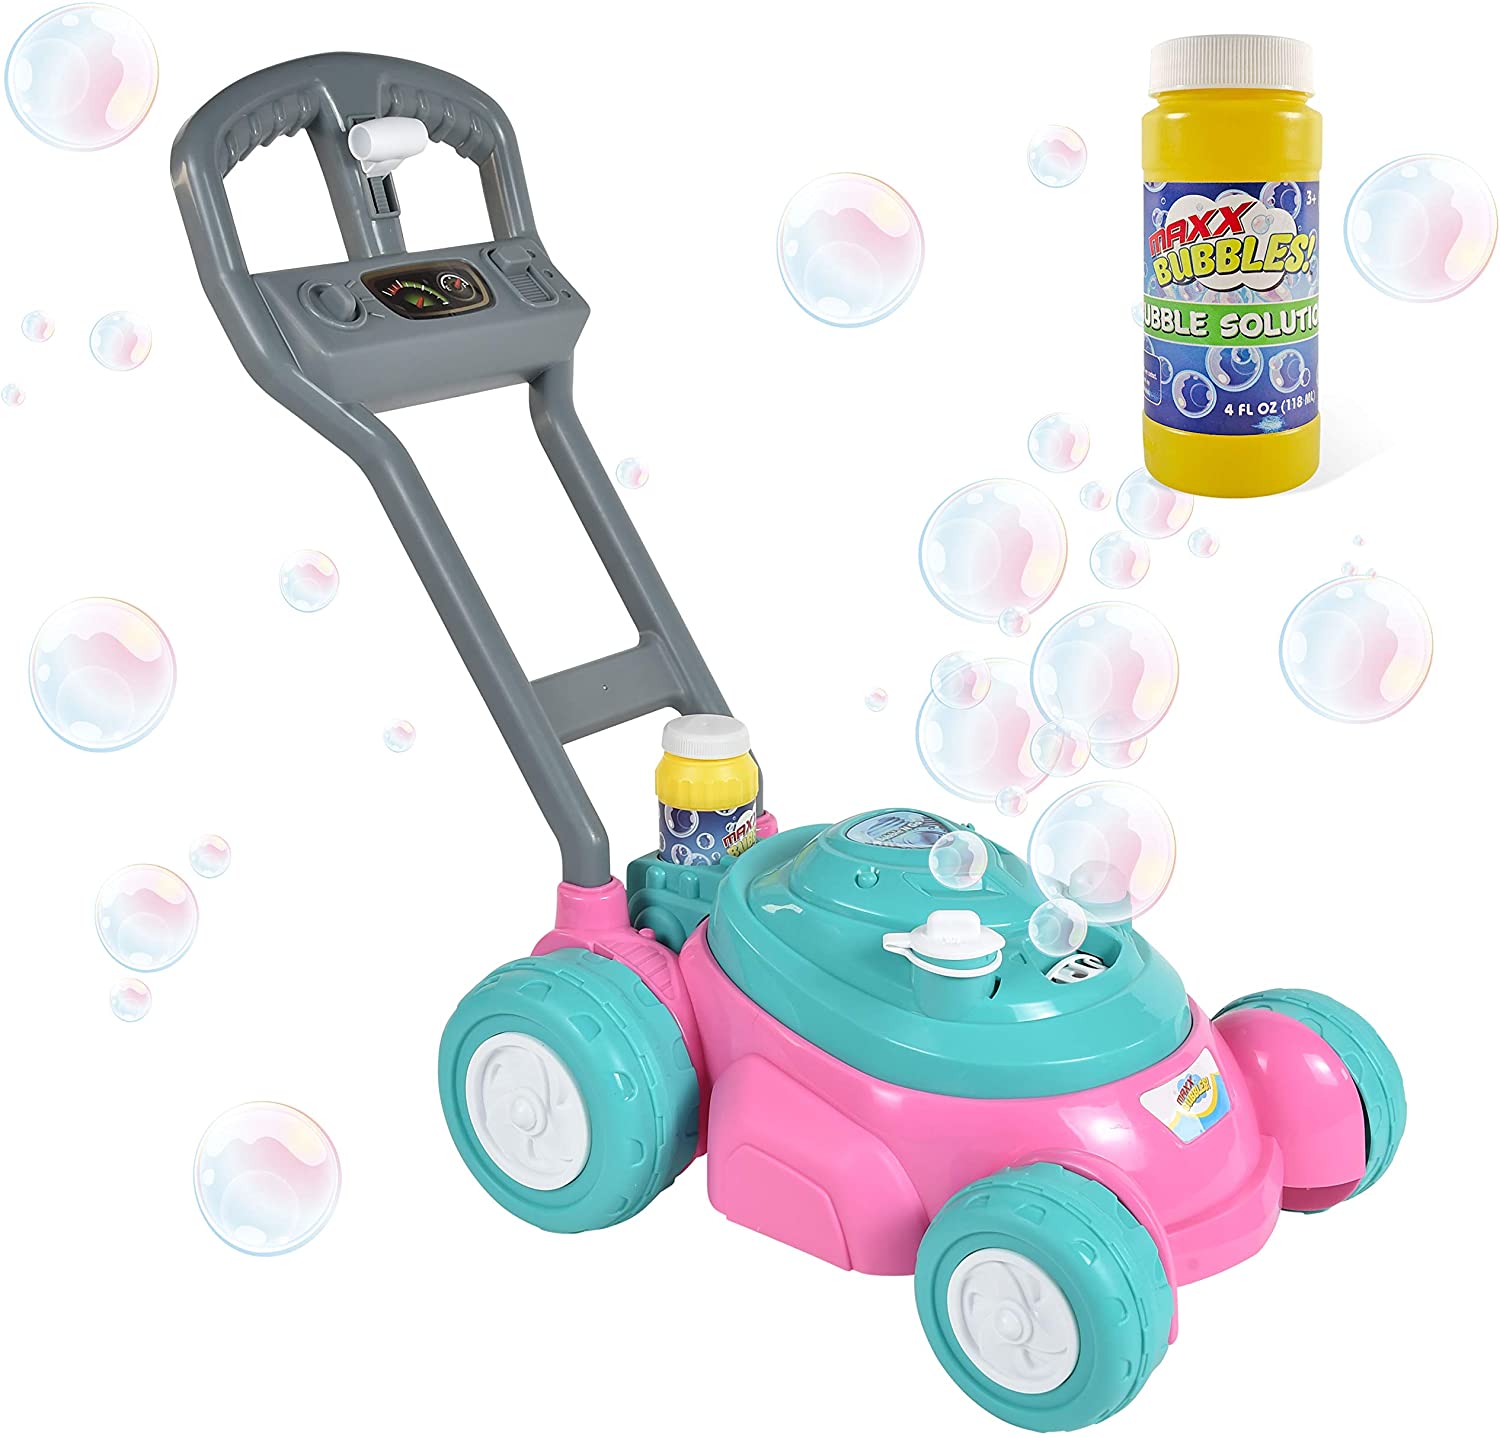 Sunny Days Entertainment Bubble-N-Go Toy Lawn Mower w/ Refill Solution (Pink) $11.55+ Free Shipping w/ Prime or $25+